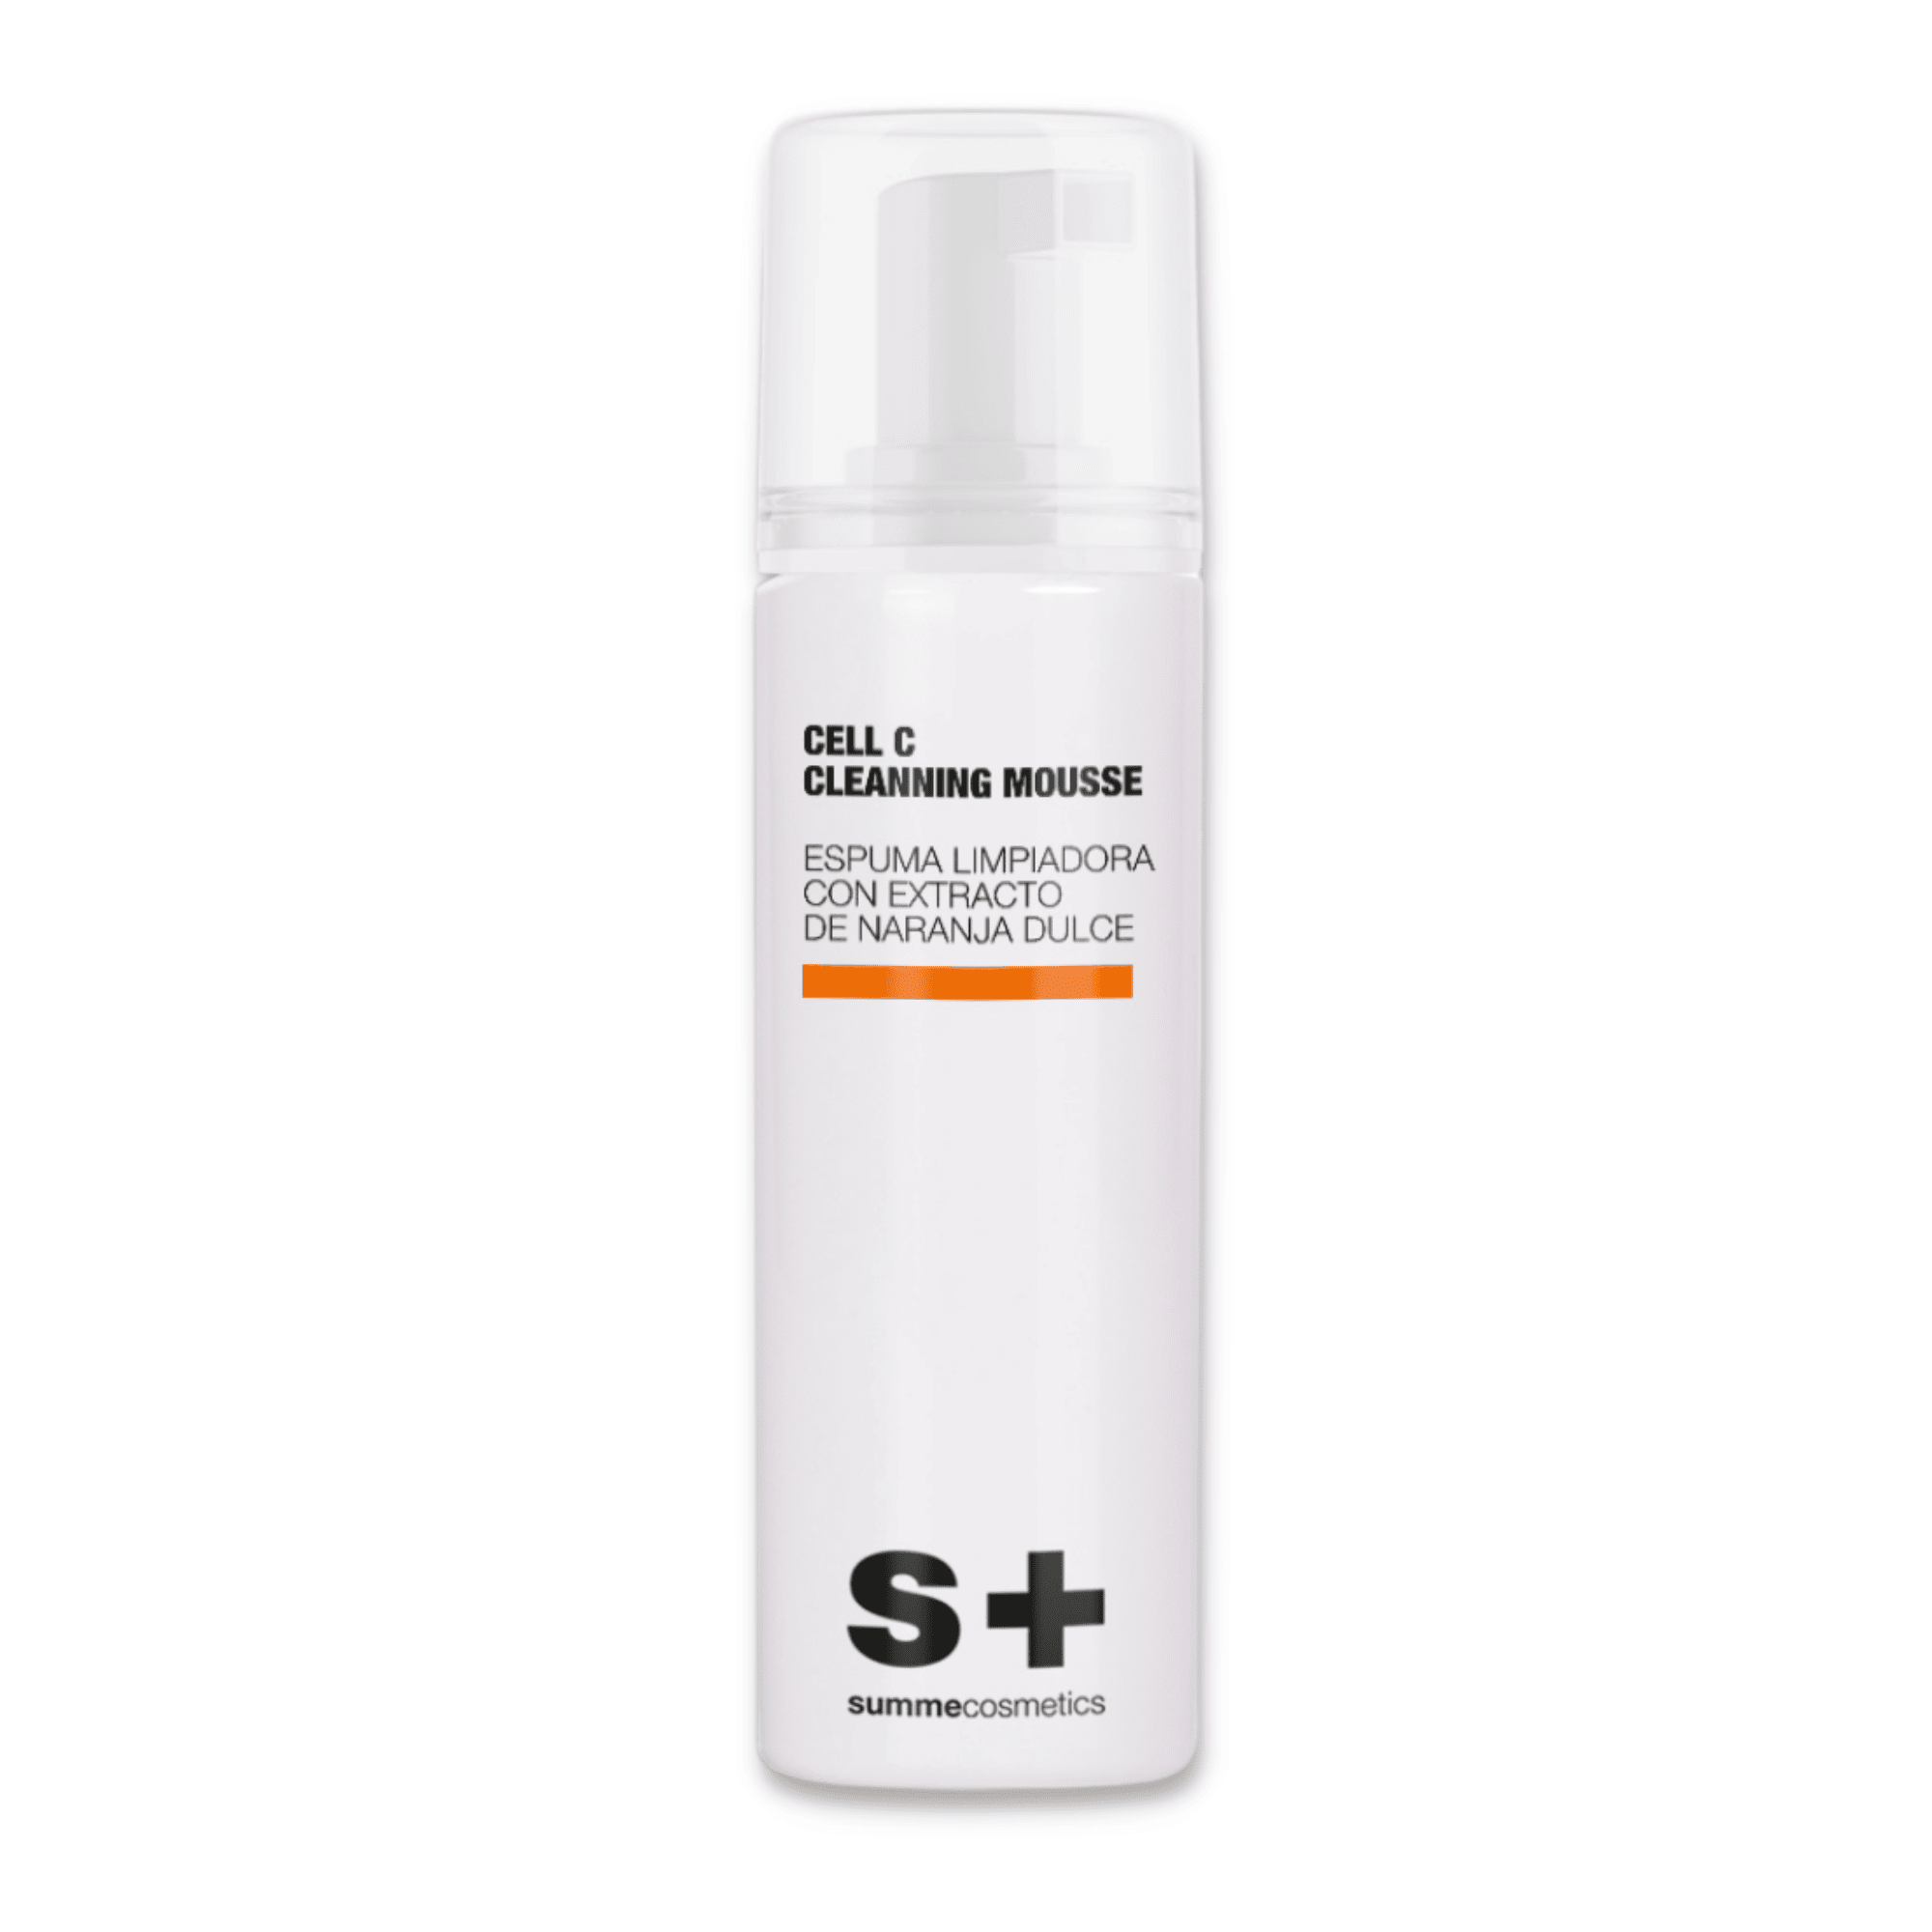 Summe Cosmetics Cell C Cleanning Mousse